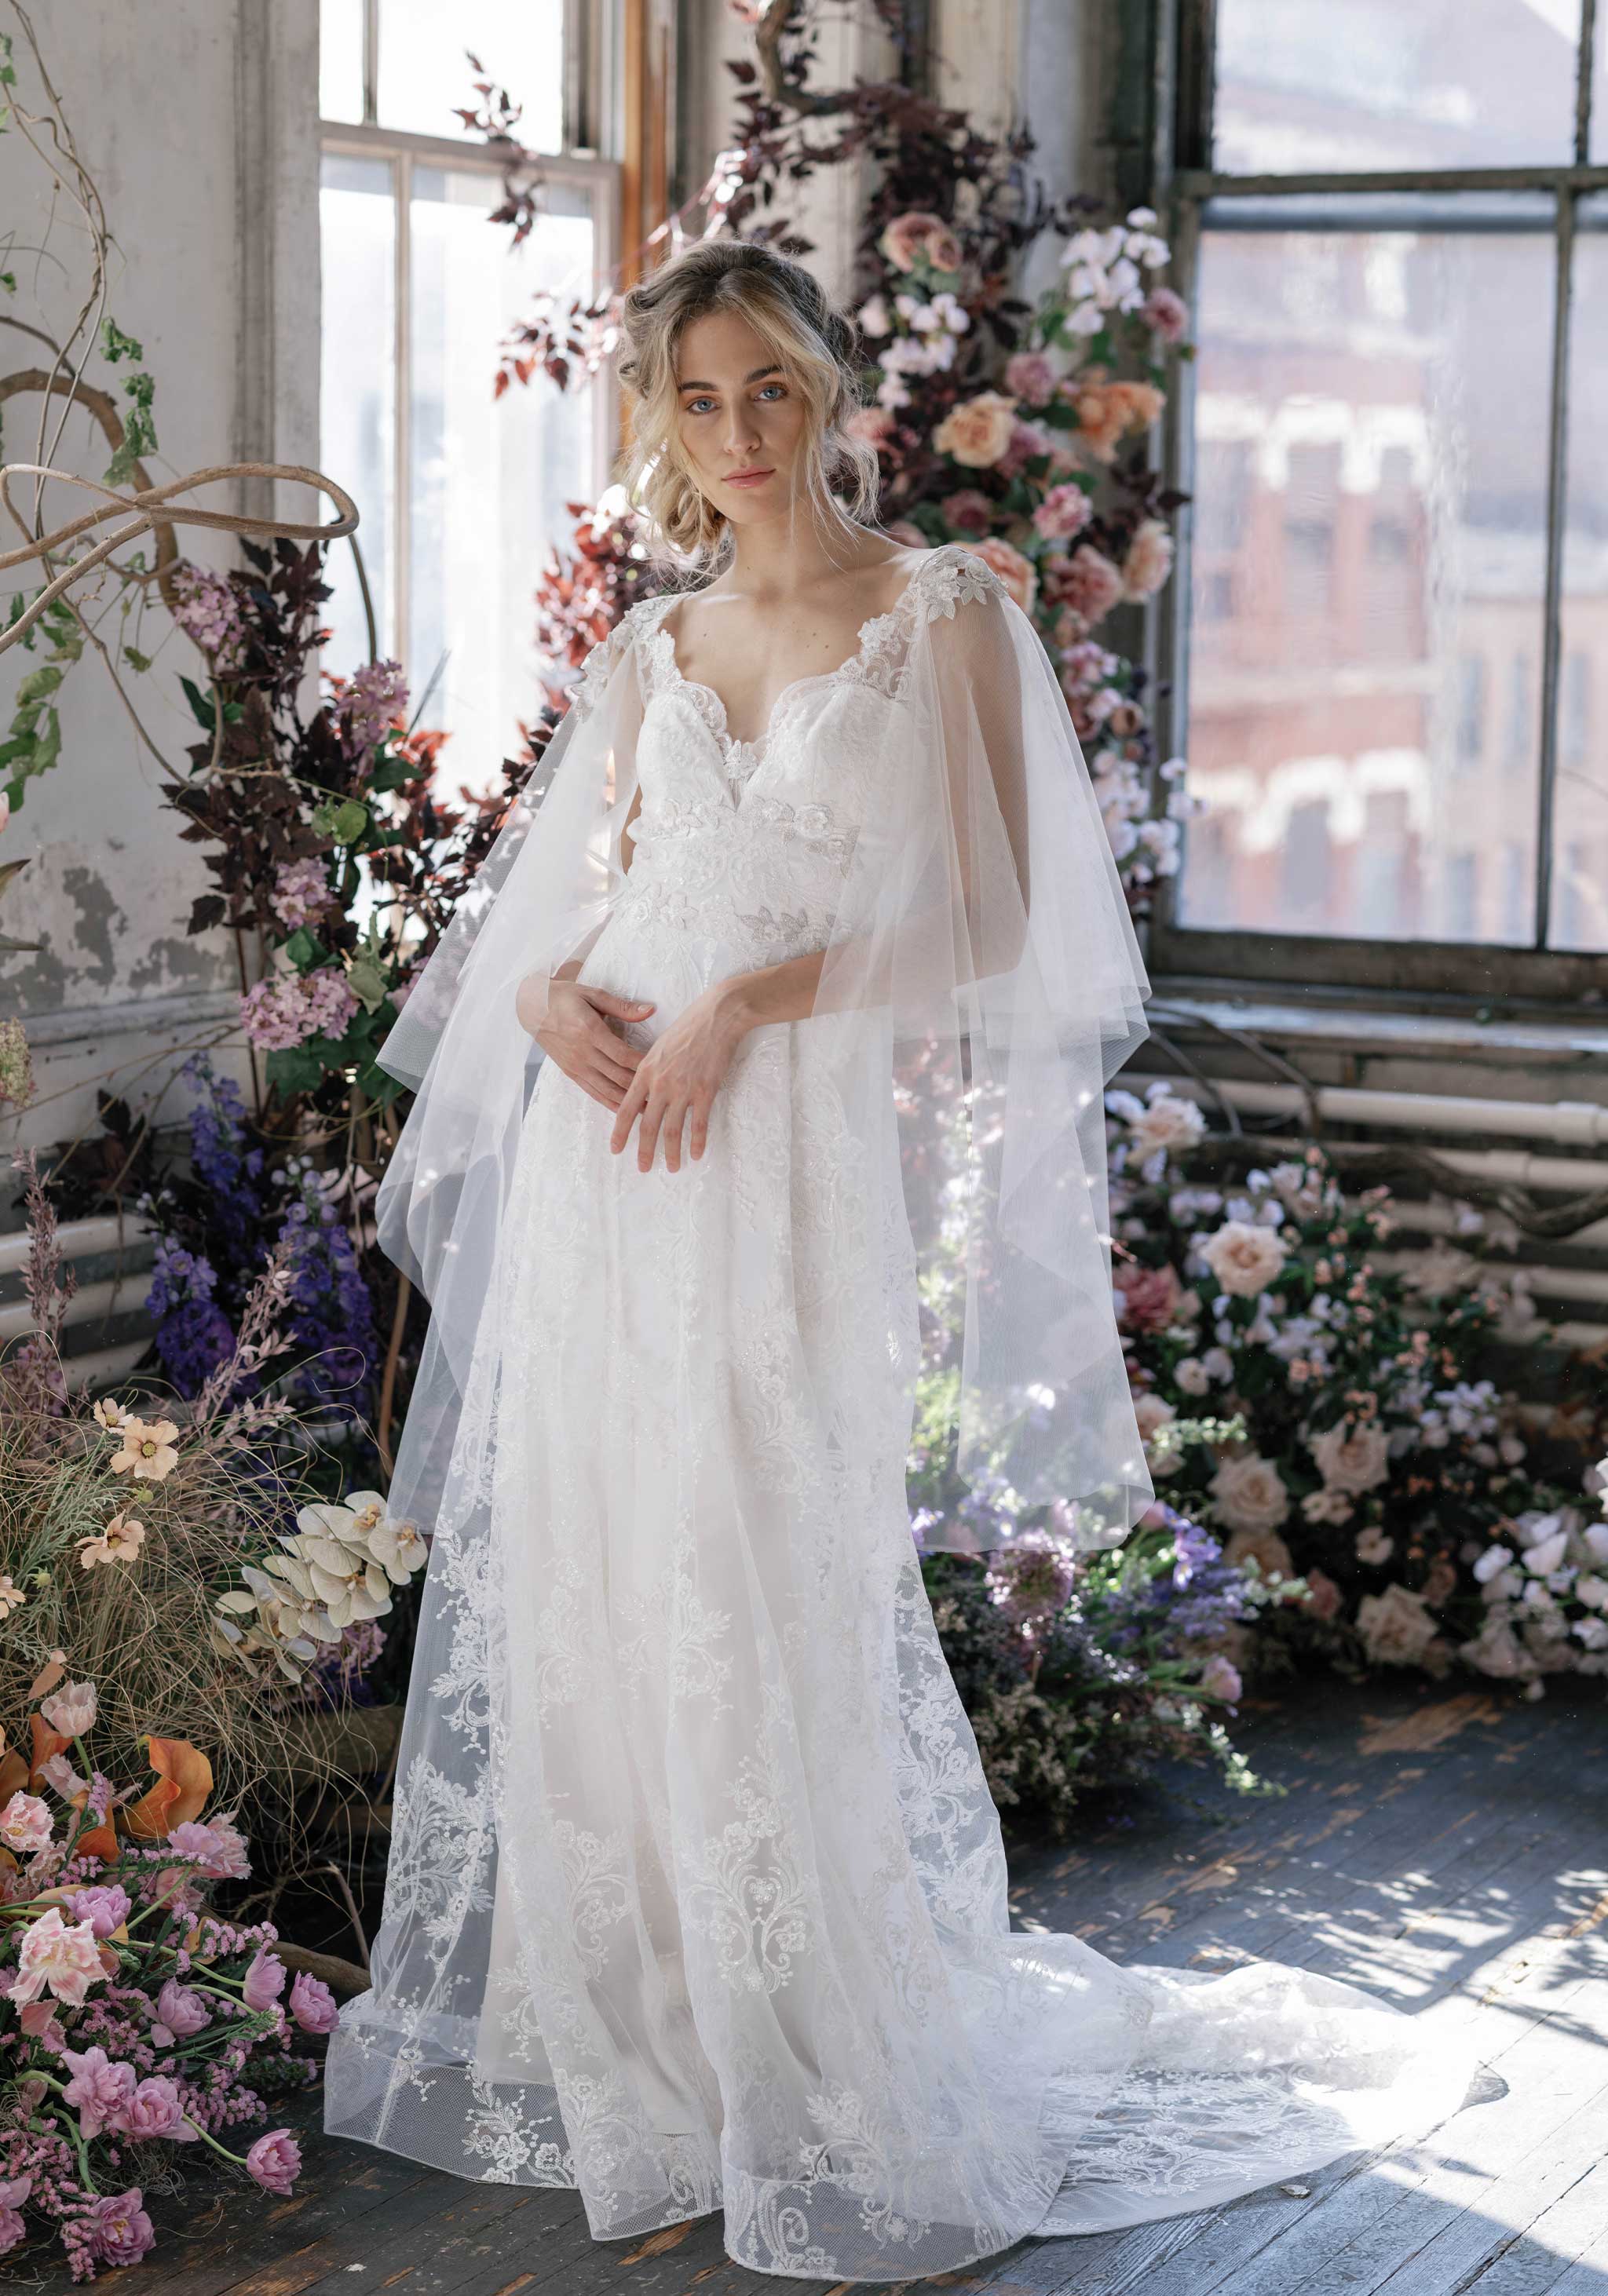 Crystal Embroidered Floral Wedding Dress Designed by Claire Pettibone